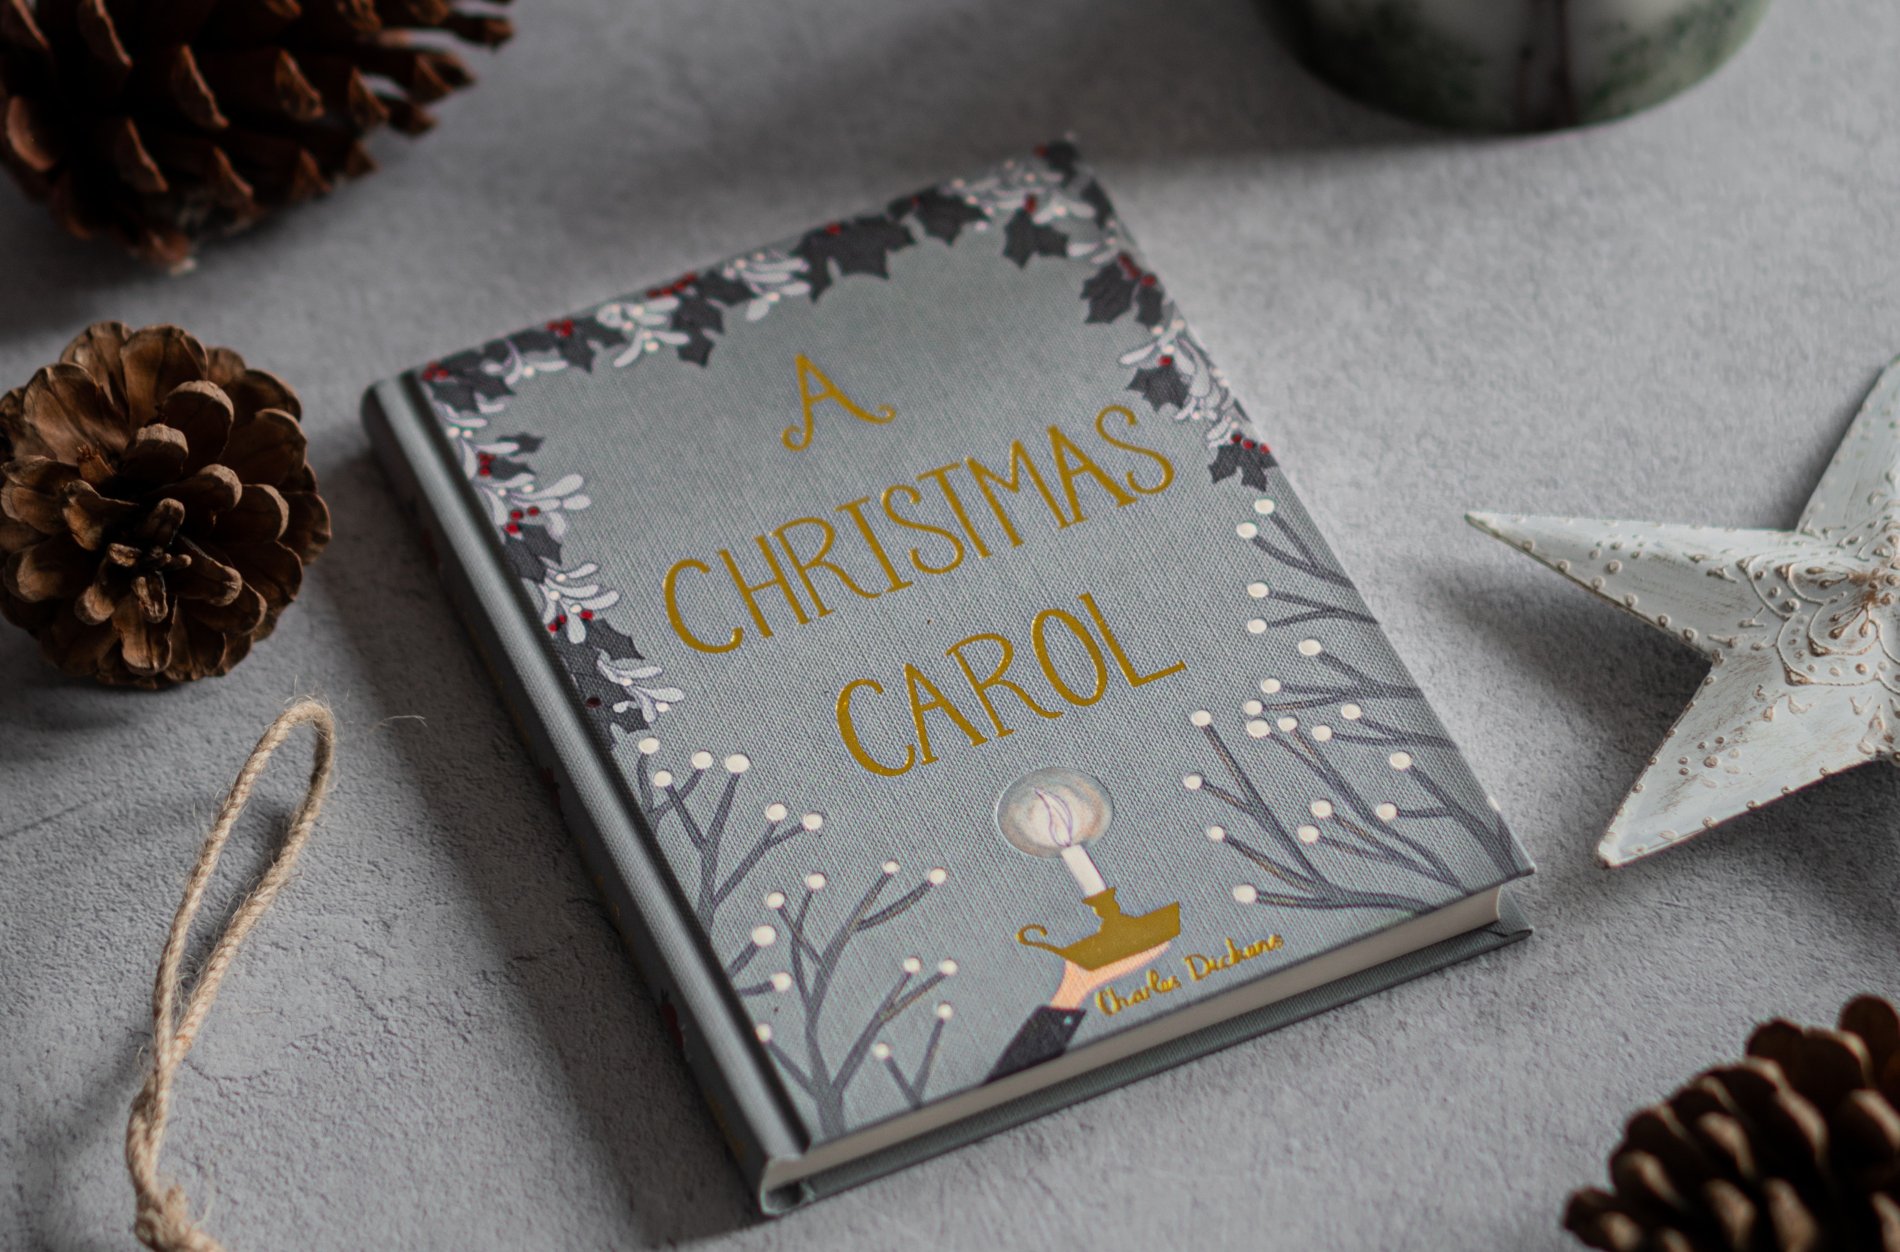 A hardcover book titled A Christmas Carol by Charles Dickens